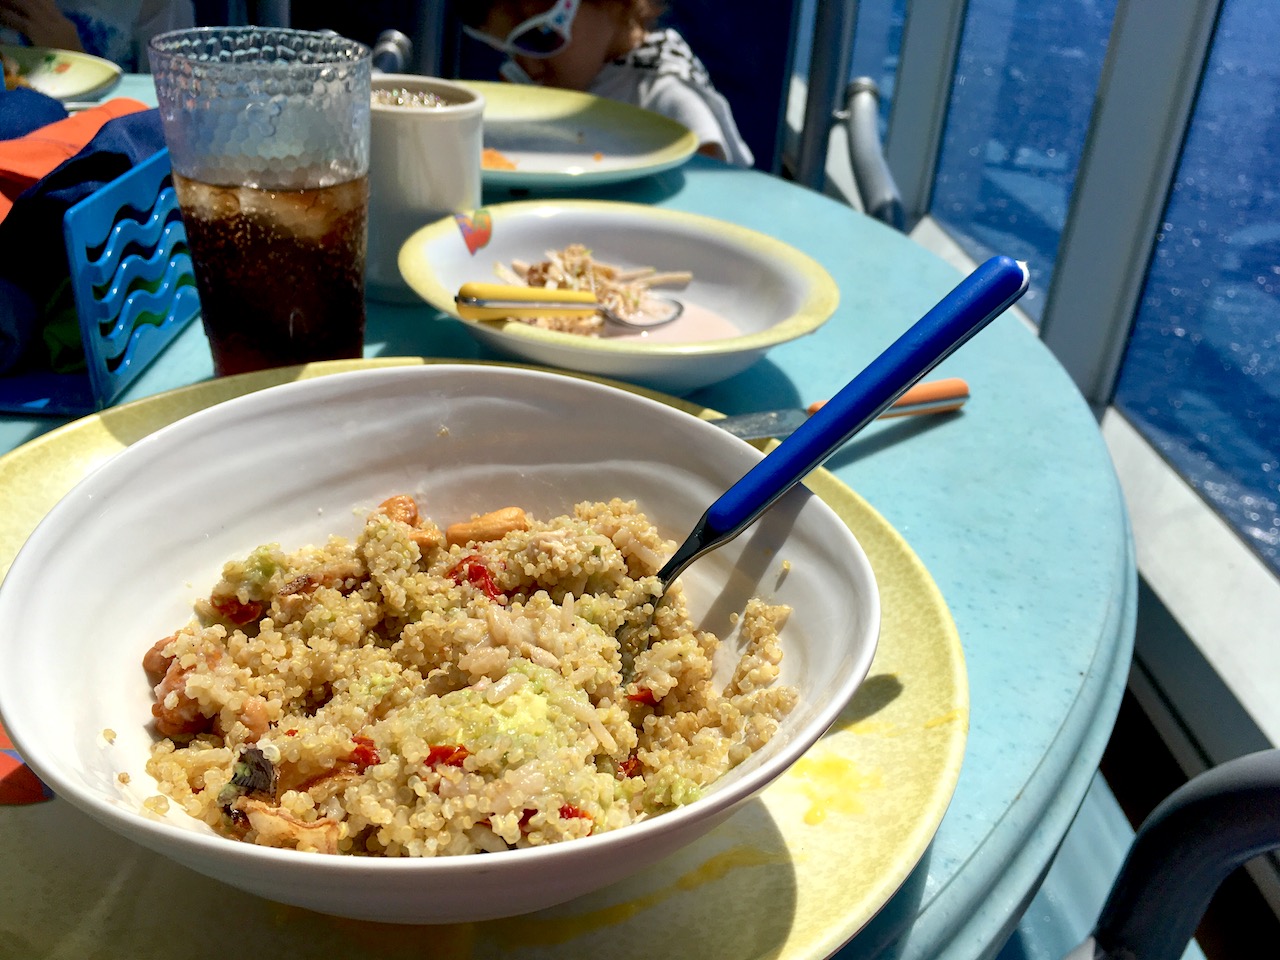 Build a Bowl on Board the Disney Magic offers a great variety of healthy foods to create your own salads!